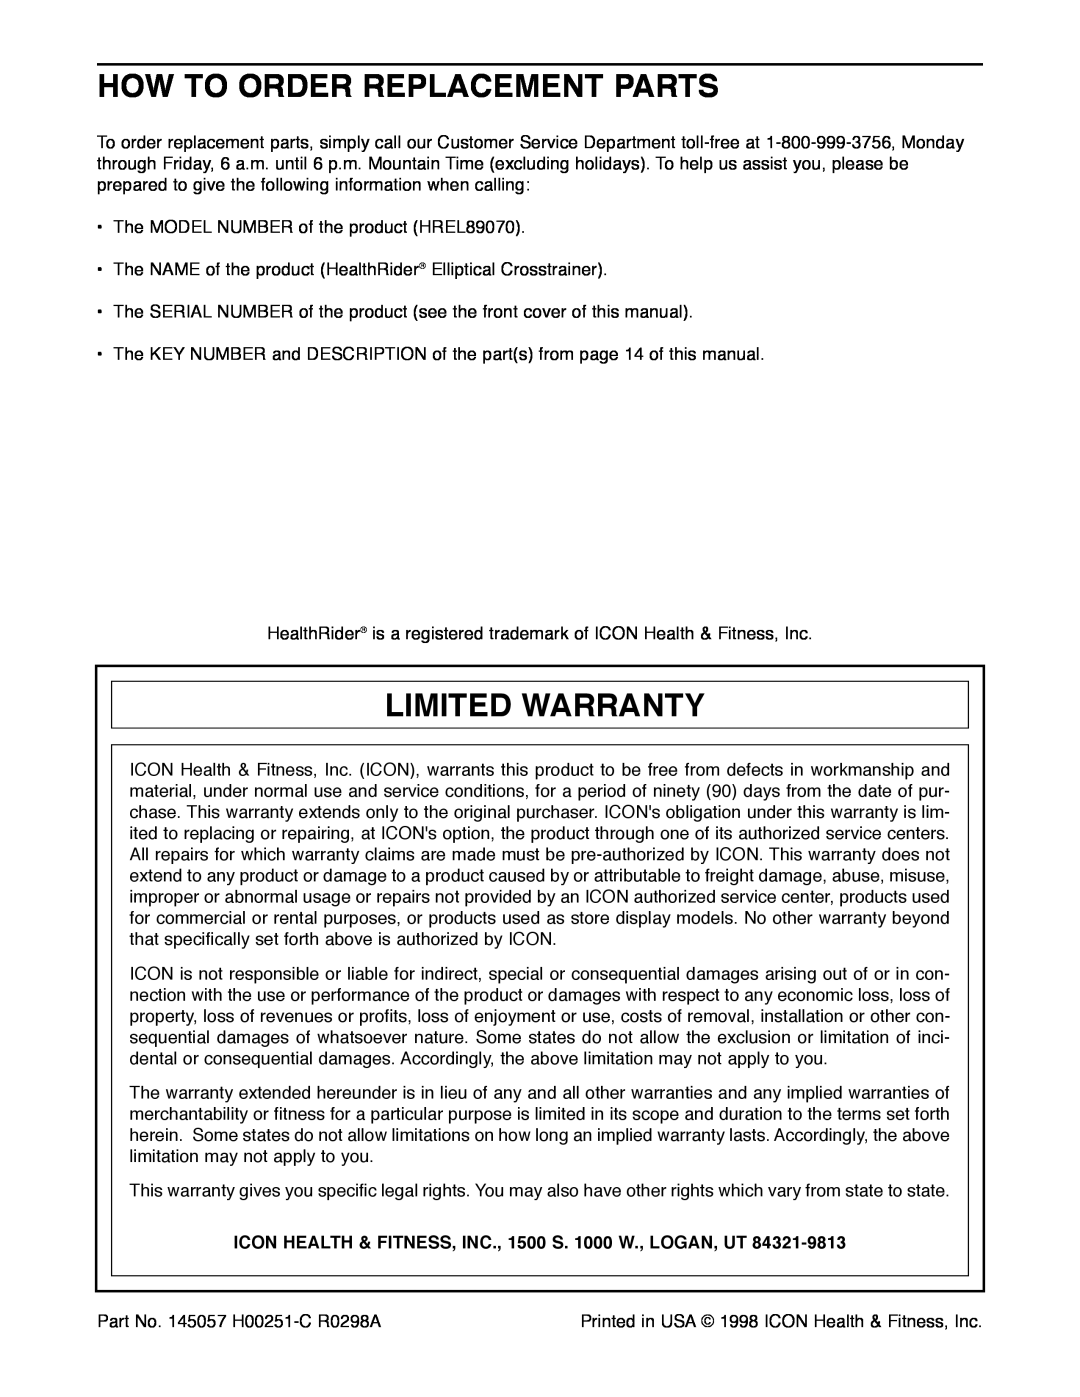 Healthrider HREL89070 manual How To Order Replacement Parts, Limited Warranty 